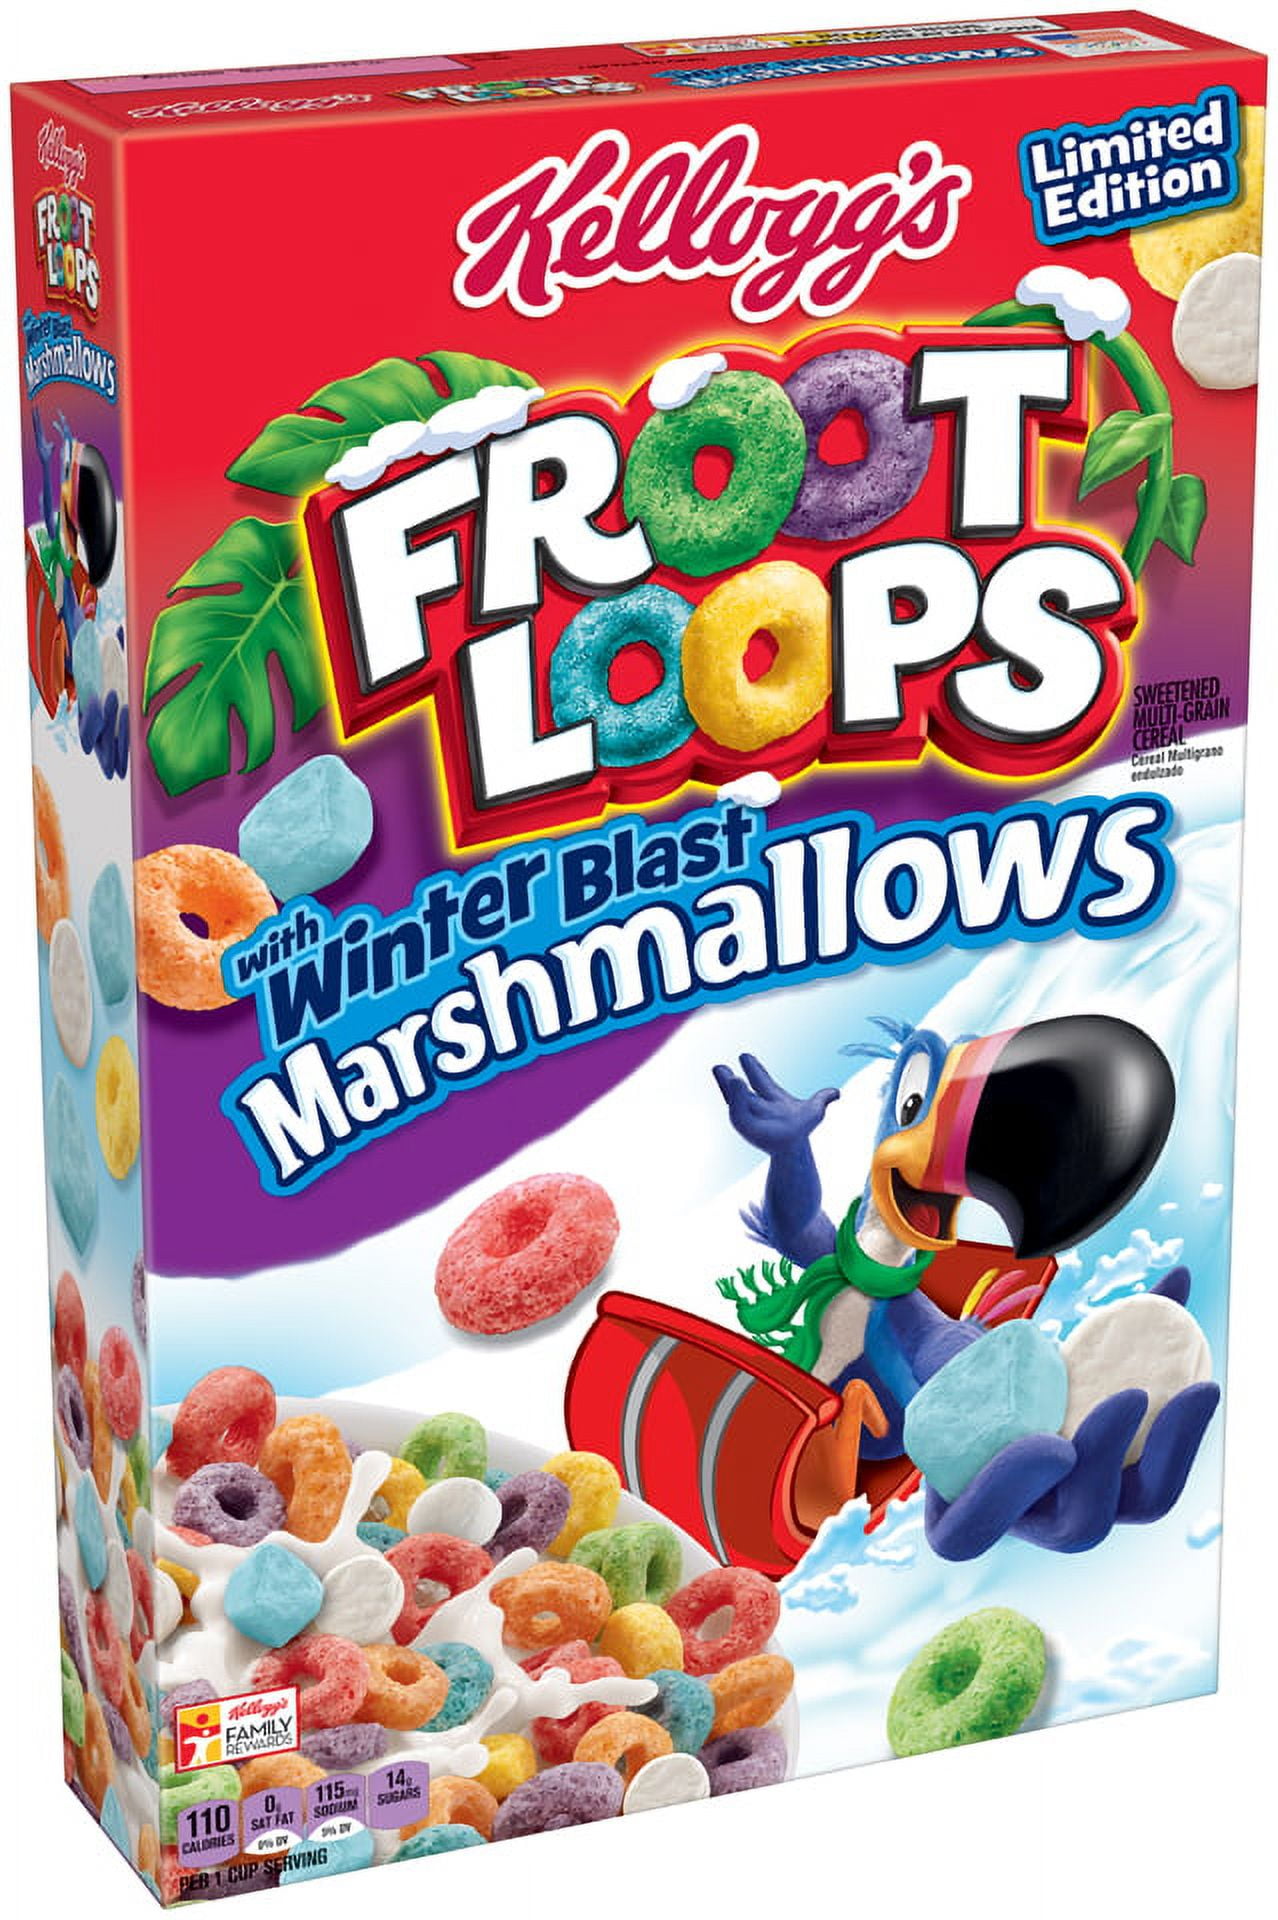 Froot Loops Sweetened Multigrain Cereal with Marshmallows 9.3 oz